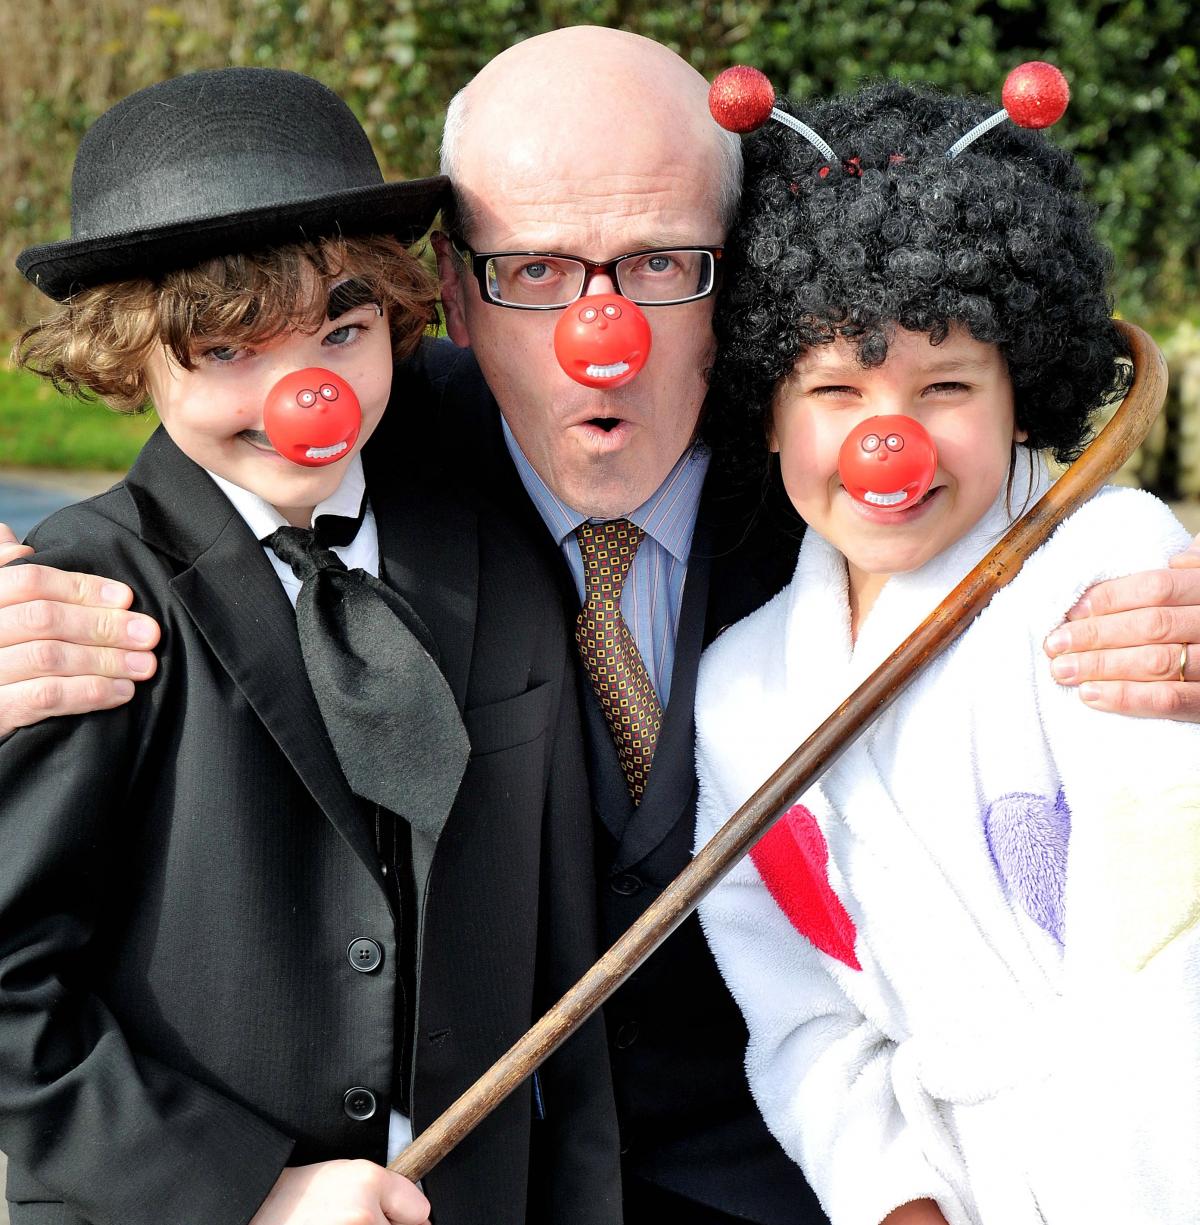 Getting ready for Red Nose Day at Westville House School, Ilkley are head teacher Charles Hollaway with Ben Wood and Aimee Lindsay, both age 9.